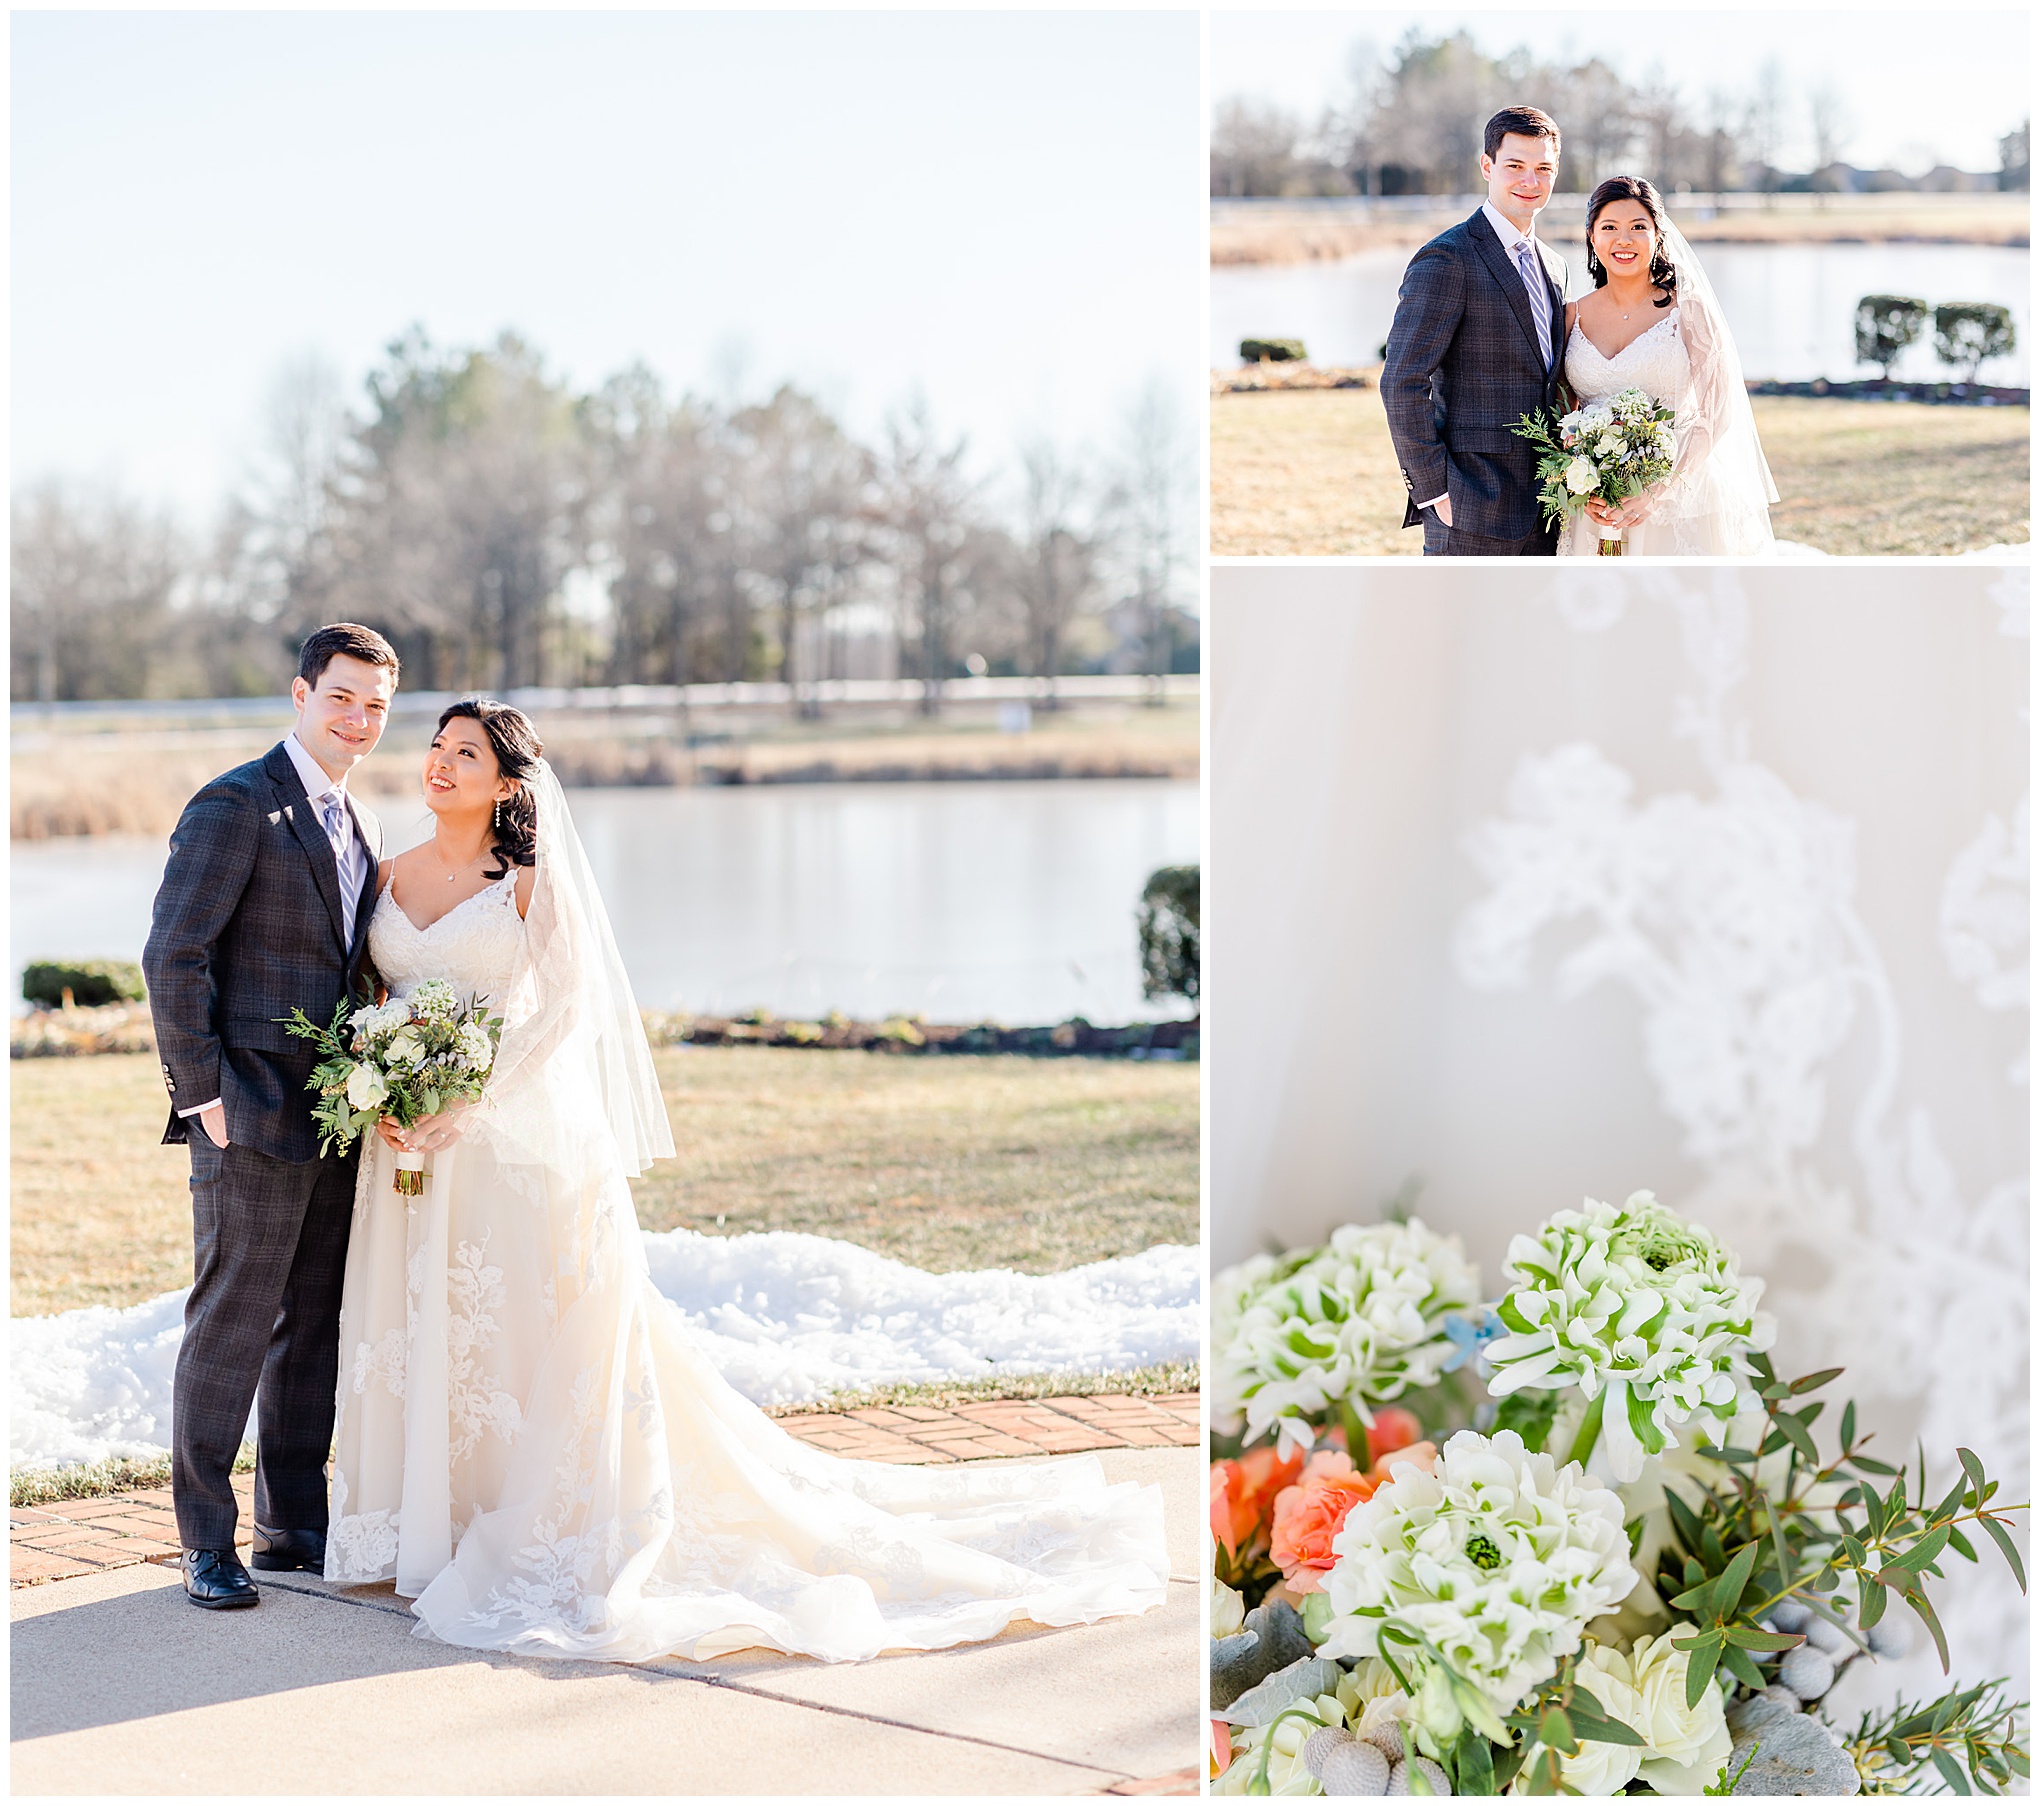 Regency at Dominion Valley wedding, Virginia country club wedding, Haymarket Virginia wedding, northern Virginia wedding, winter wedding, winter wedding aesthetic, DC micro wedding, northern Virginia wedding venues, classic winter wedding, Rachel E.H. Photography, wedding bouquet by Company Flowers, bride and groom smiling in snow